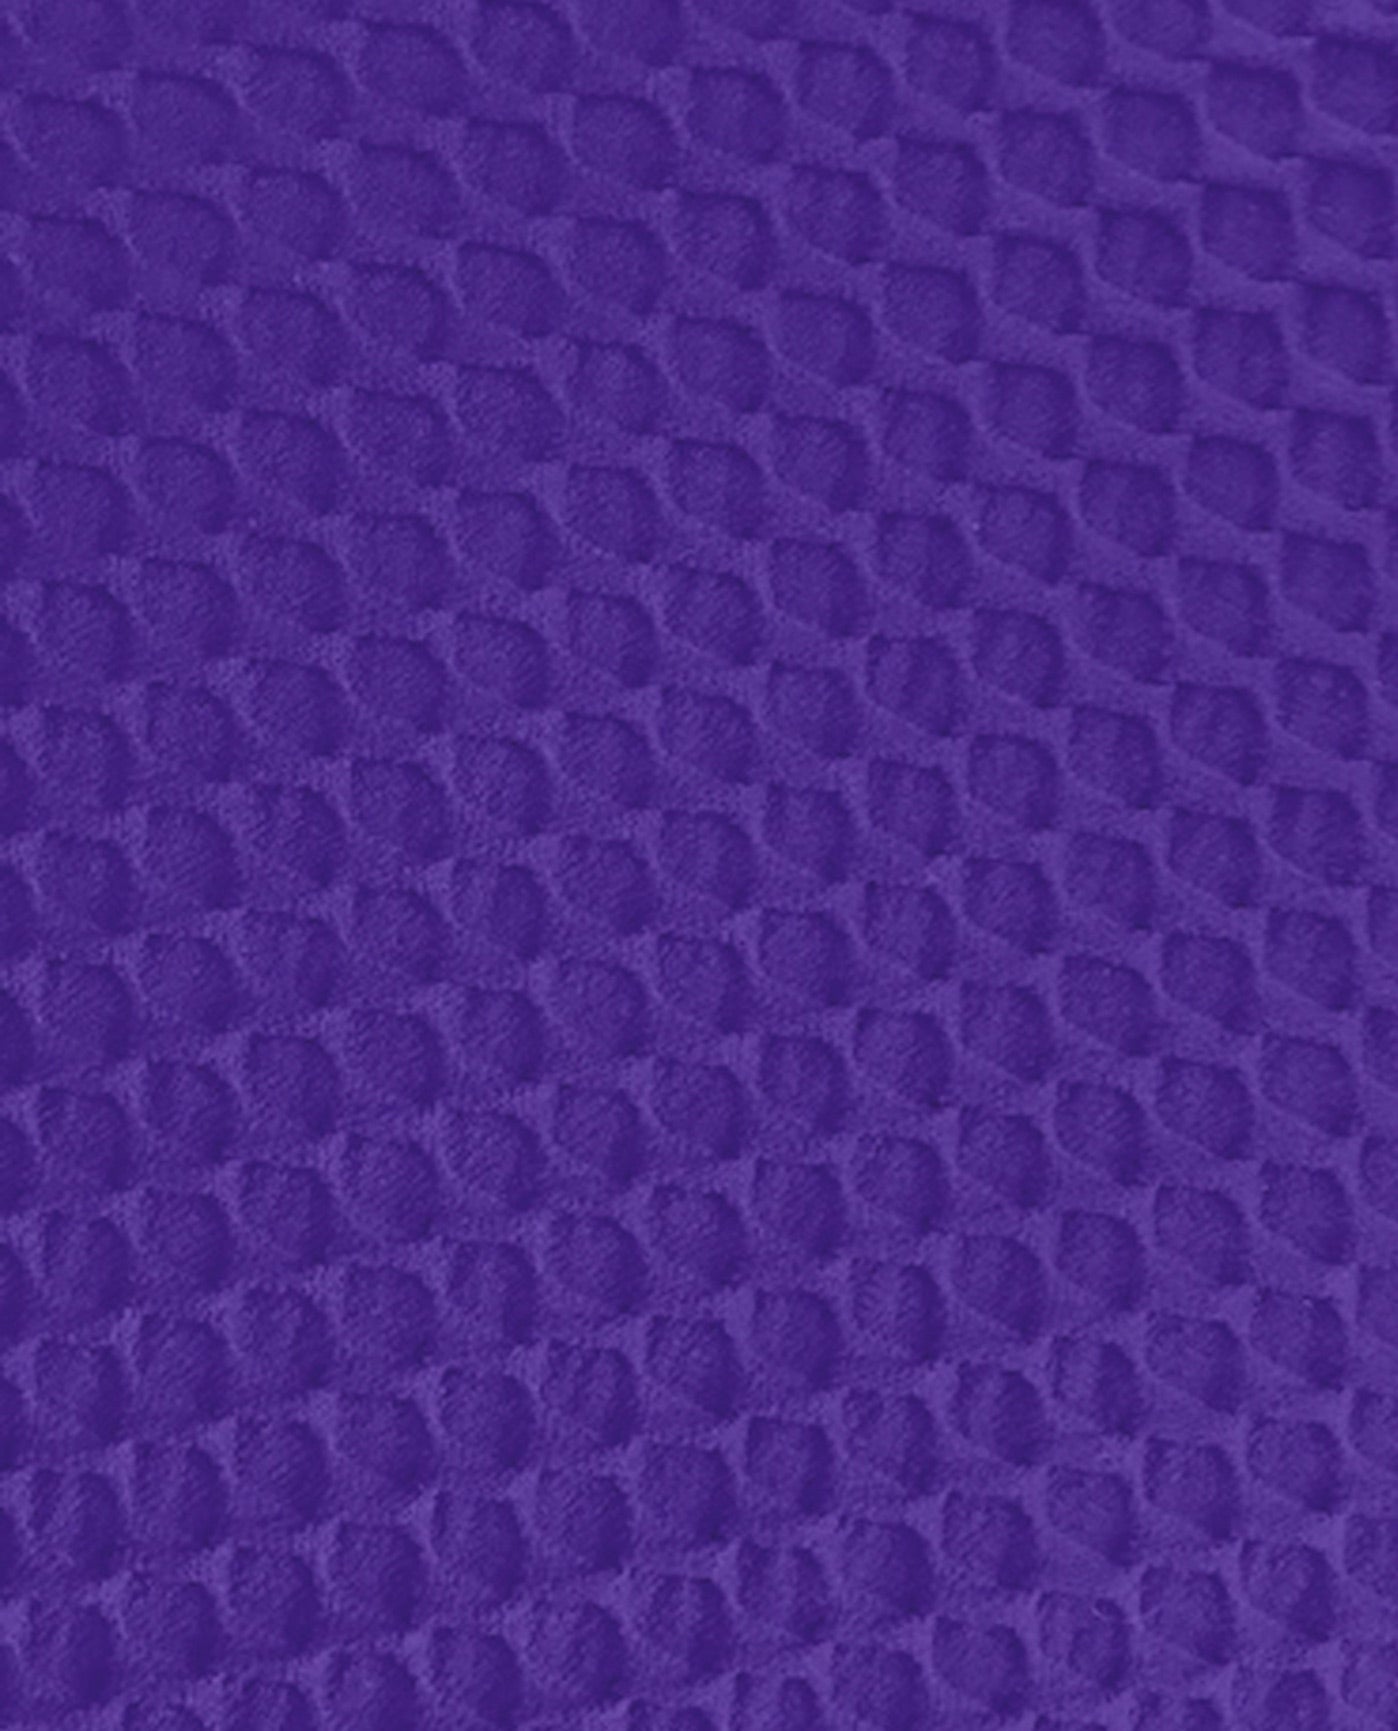 FABRIC SWATCH VIEW OF CHLORINE RESISTANT AQUAMORE SOLID TEXTURED HIGH NECK PLUS SIZE LONG TORSO SWIMSUIT | 510 AQT TEXTURED PURPLE